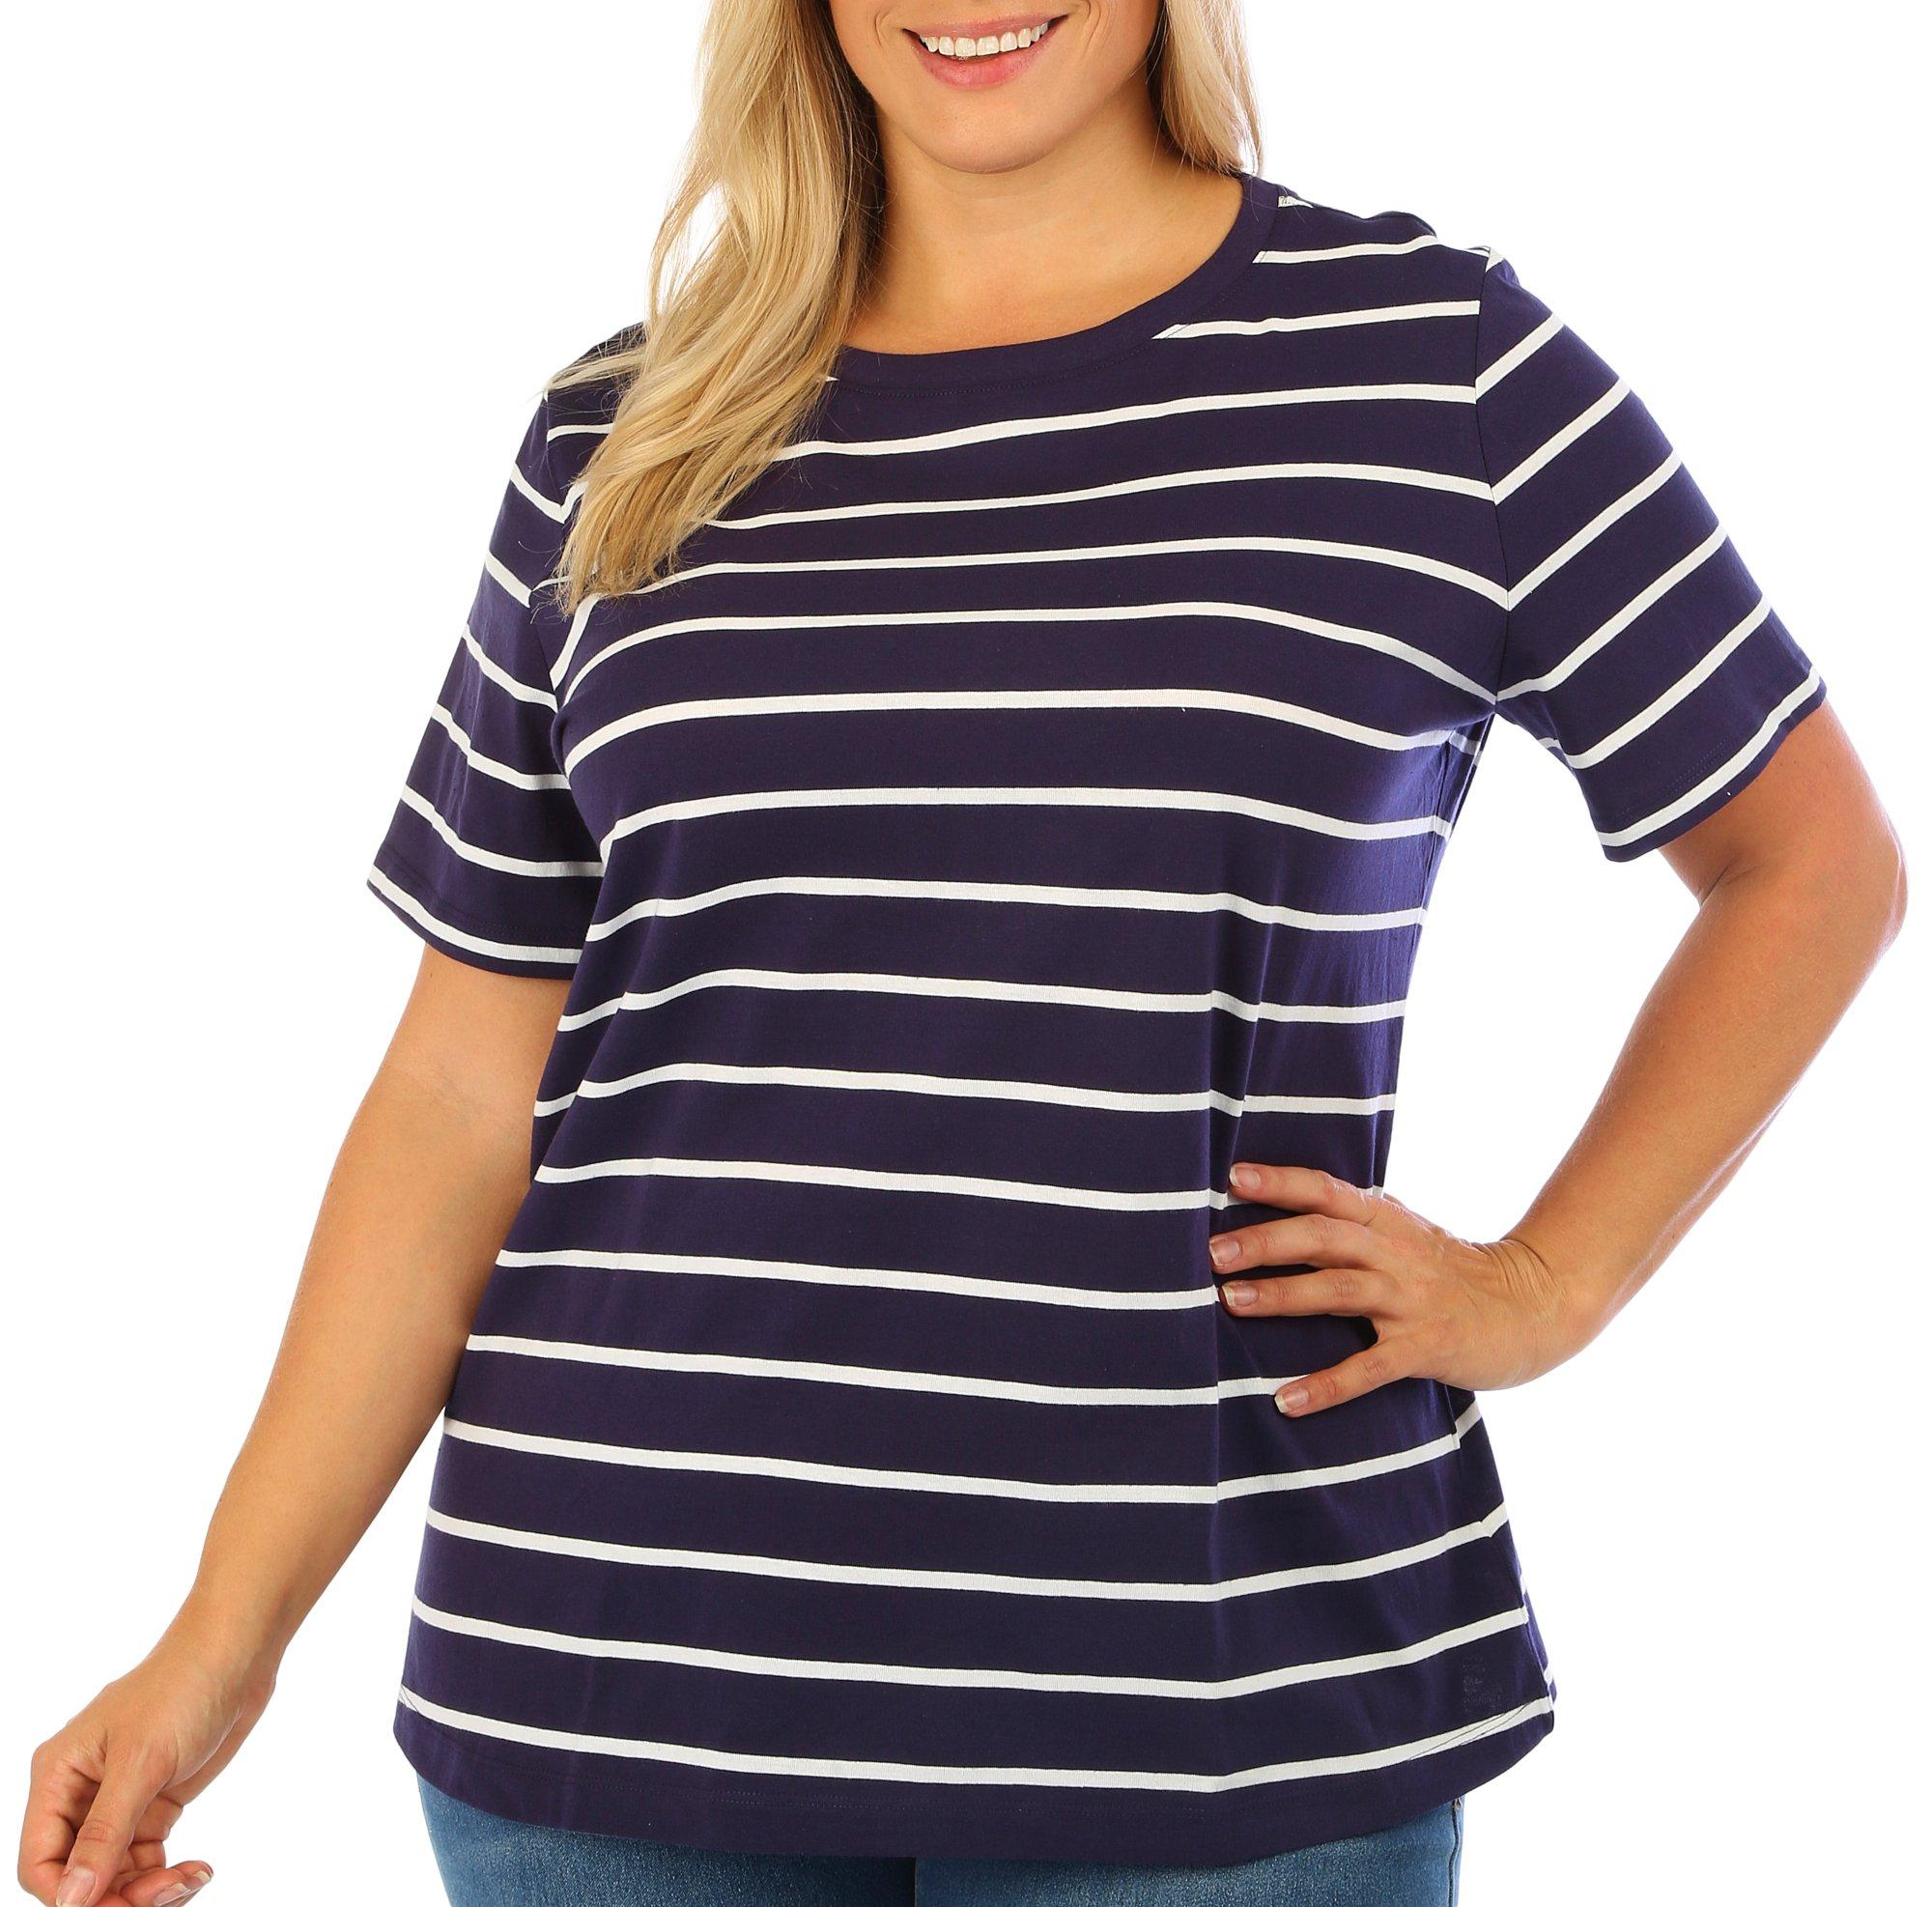 Coral Bay Plus Stripes Crew Neck Short Sleeve Top